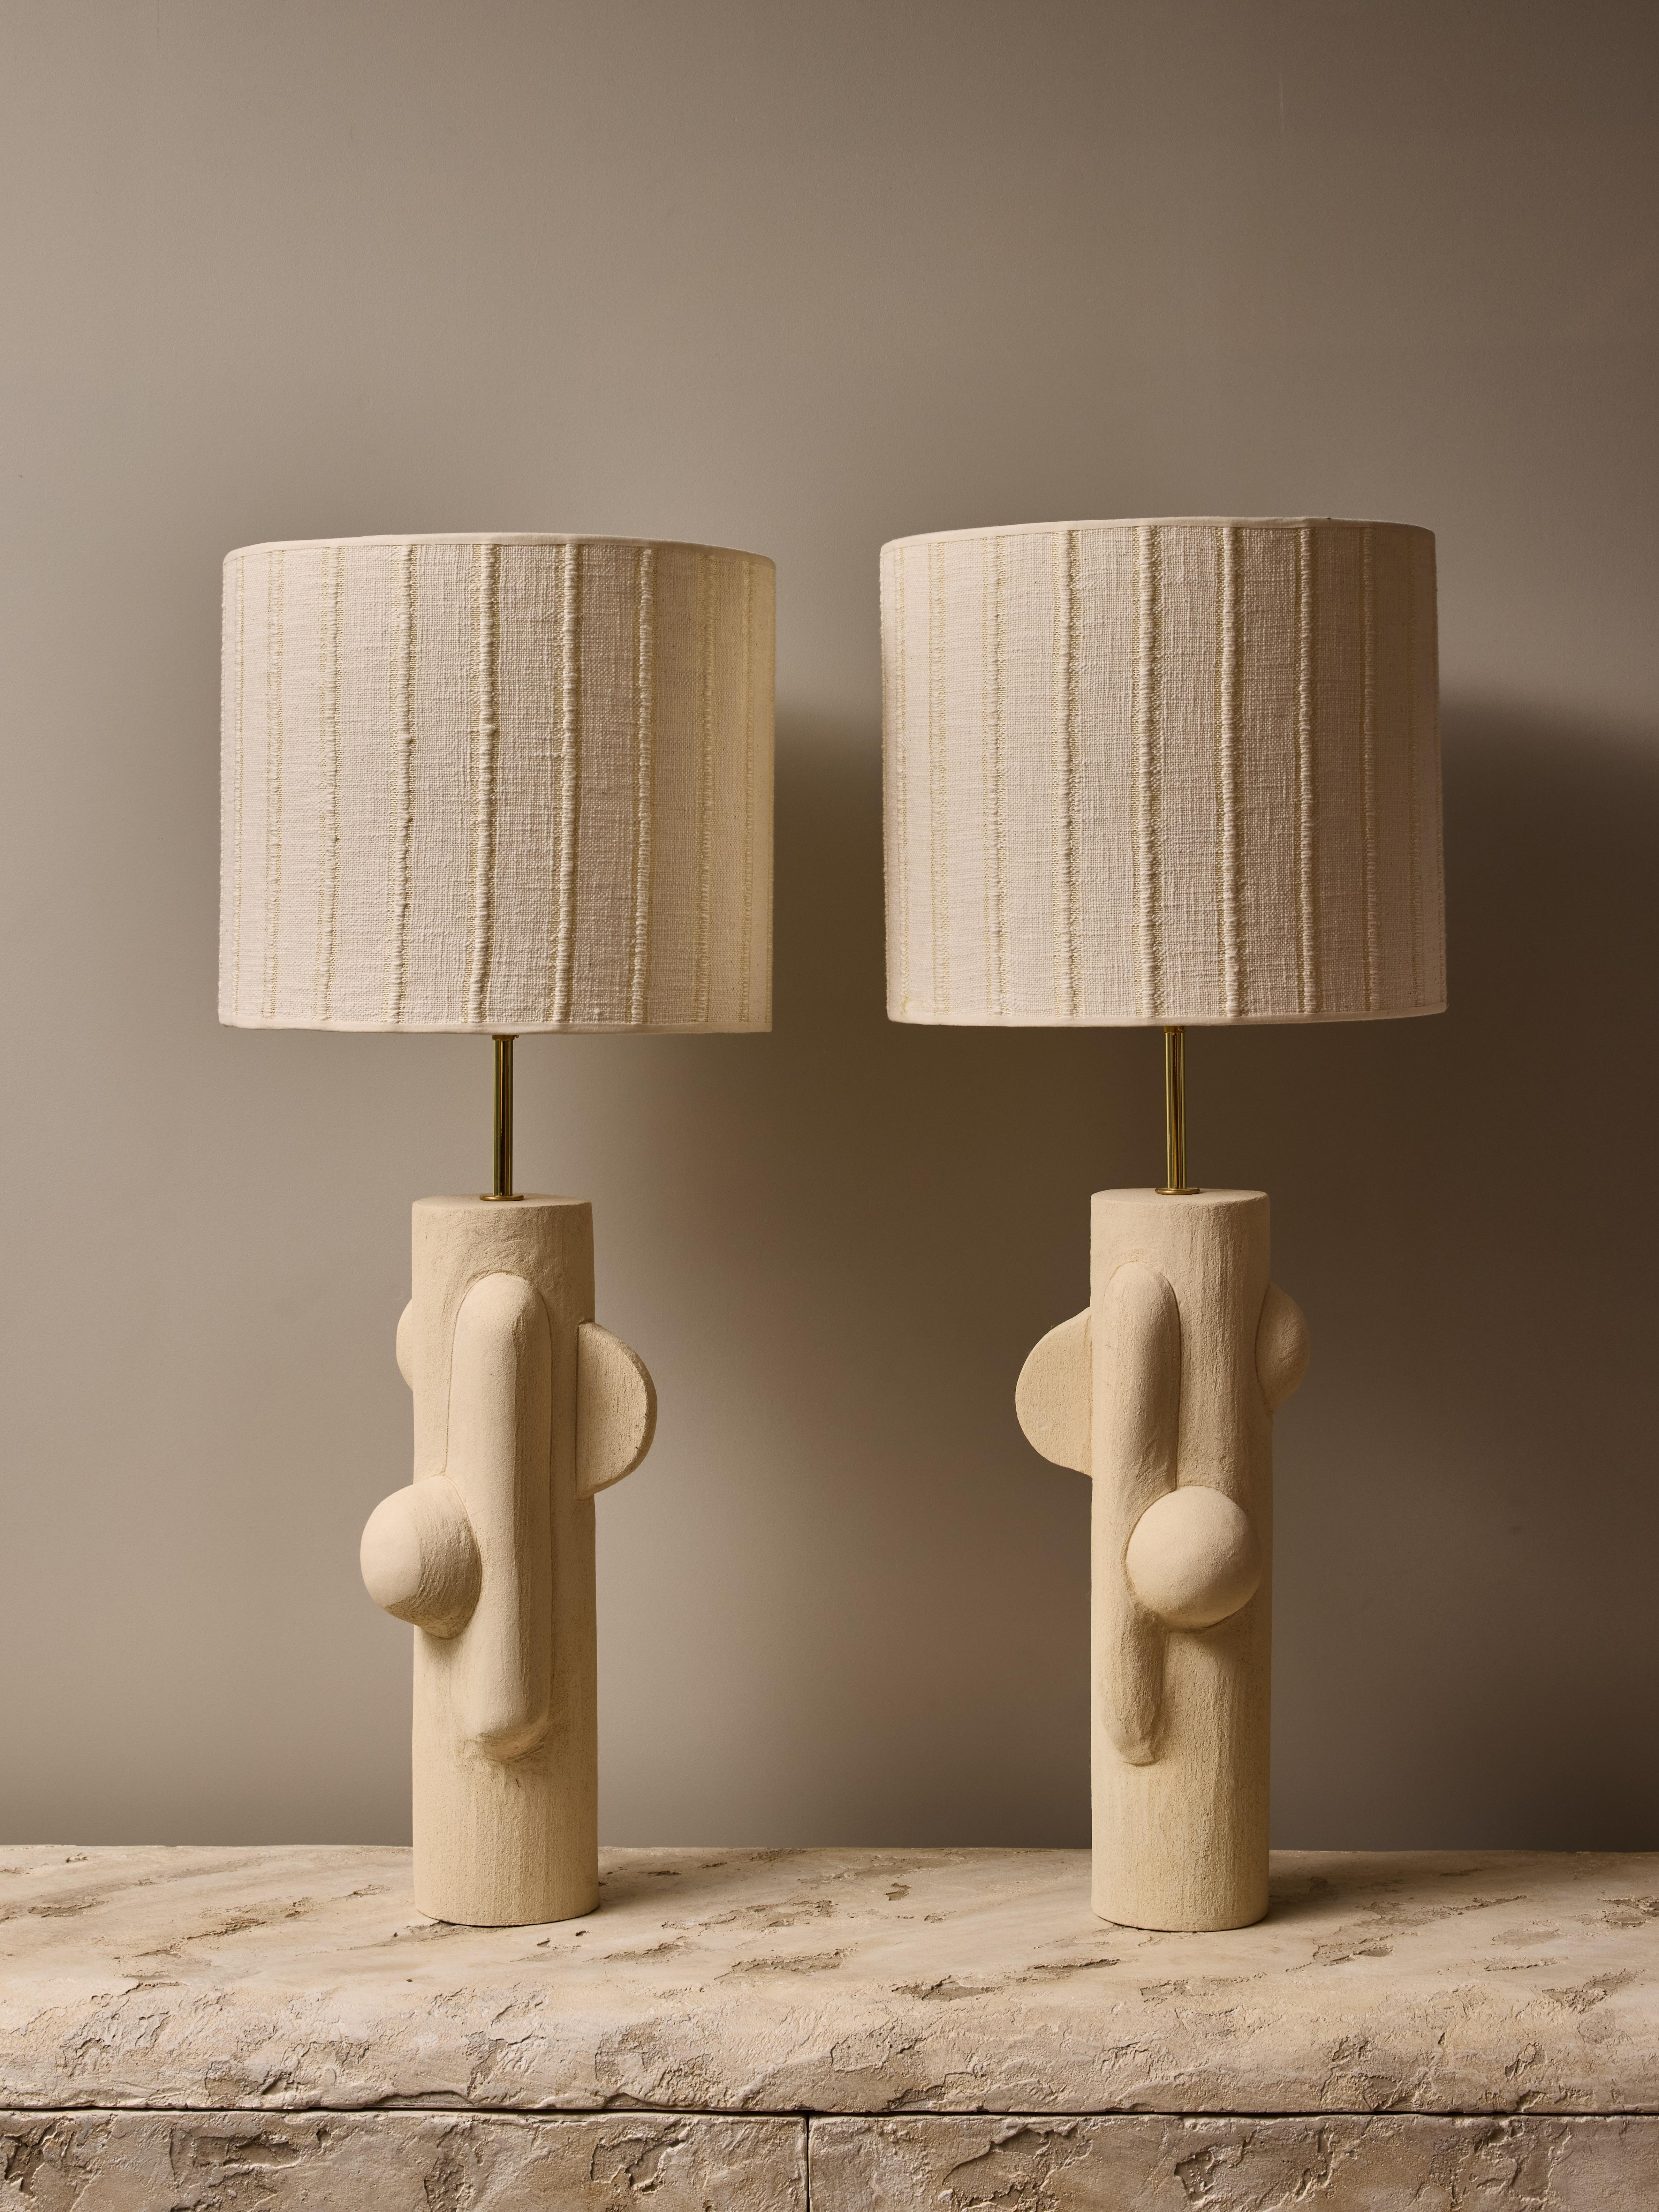 Pair of ceramic table lamps by the talented french contemporary artist Olivia Cognet.

These thin tubular shape lamps have mirrored design of soft geometrical shapes, brass hardware and topped with a custom lampshade.

Stamped on the